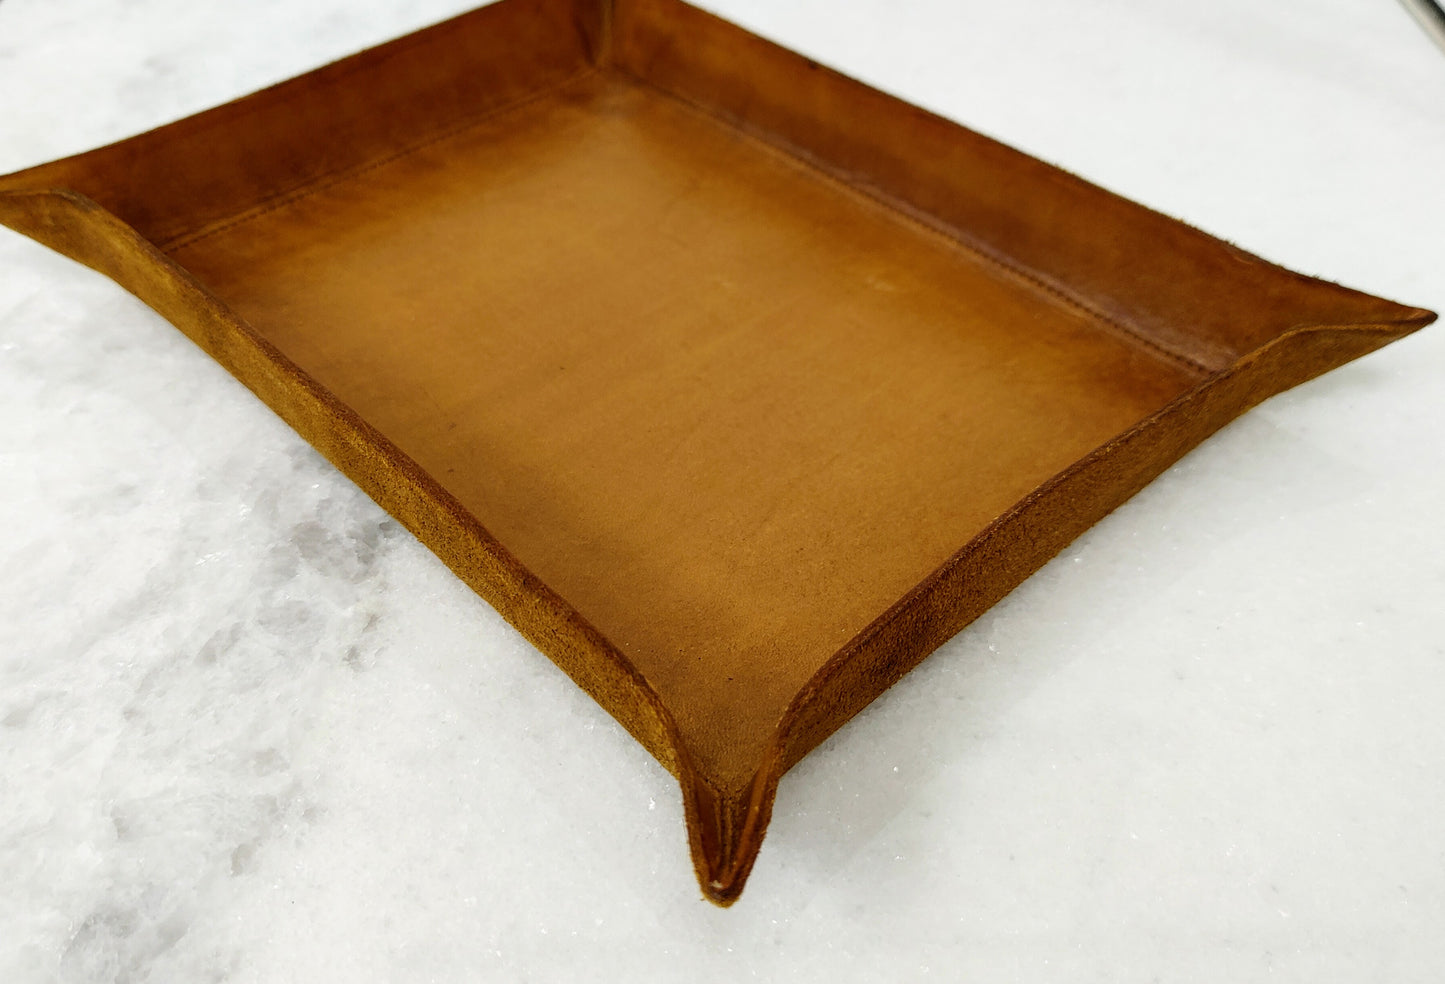 Hand-made all natural leather catch all tray blank